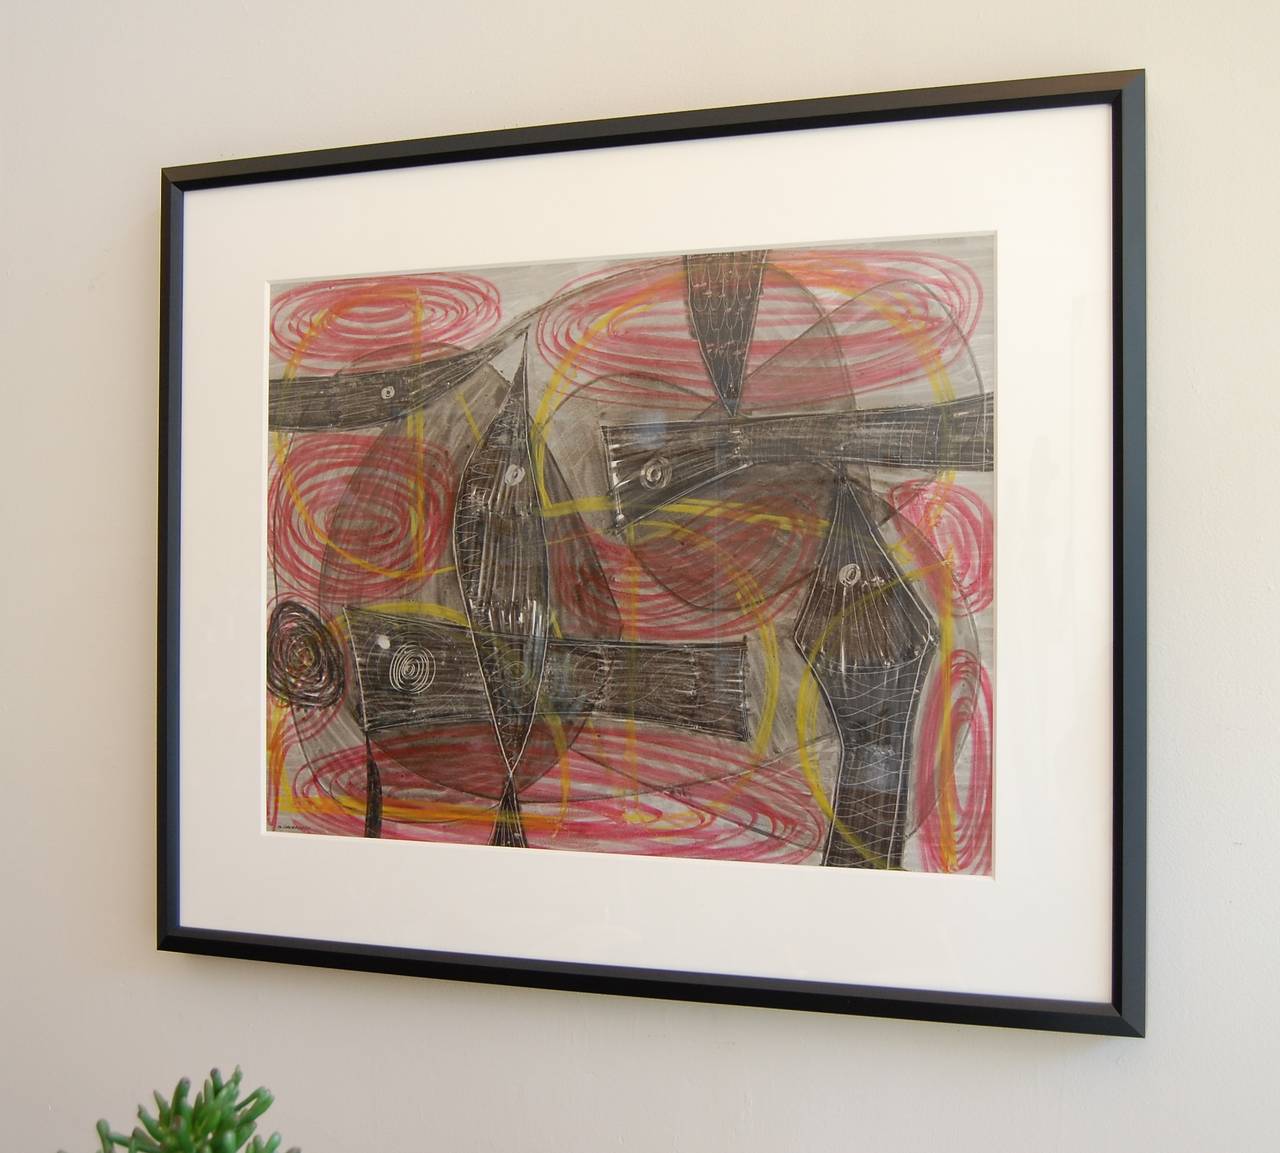 California artist Milton Cavagnaro's (1913-1993) abstract in Gouache #2 from his 1948 solo show at the California Palace of the Legion of Honor in San Francisco. Cavagnaro attended the College of Arts and Crafts from 1930 to1934 and was an